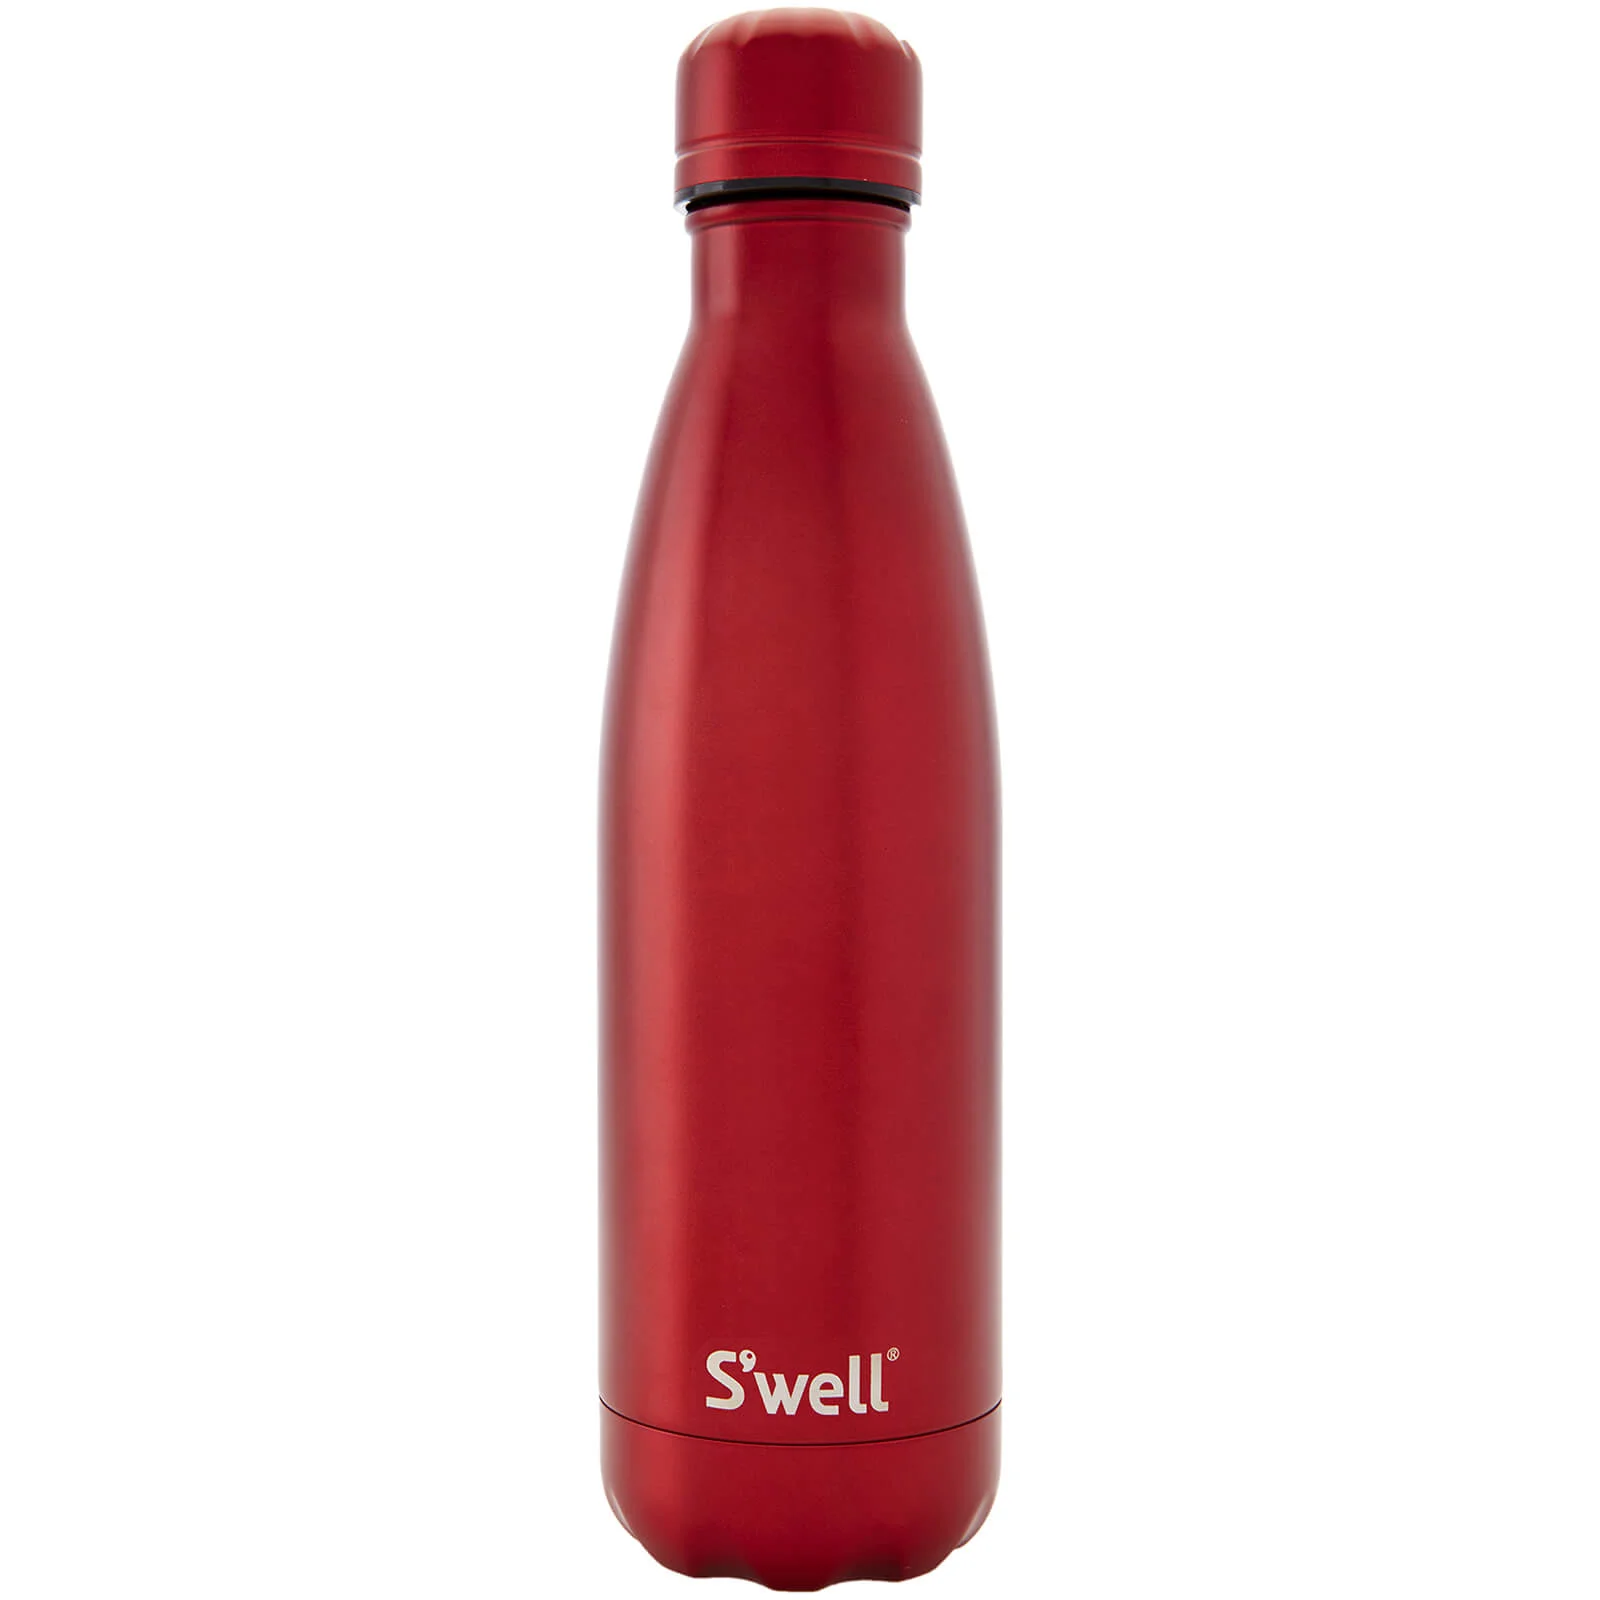 S'well The Gem Ruby Water Bottle 500ml Image 1